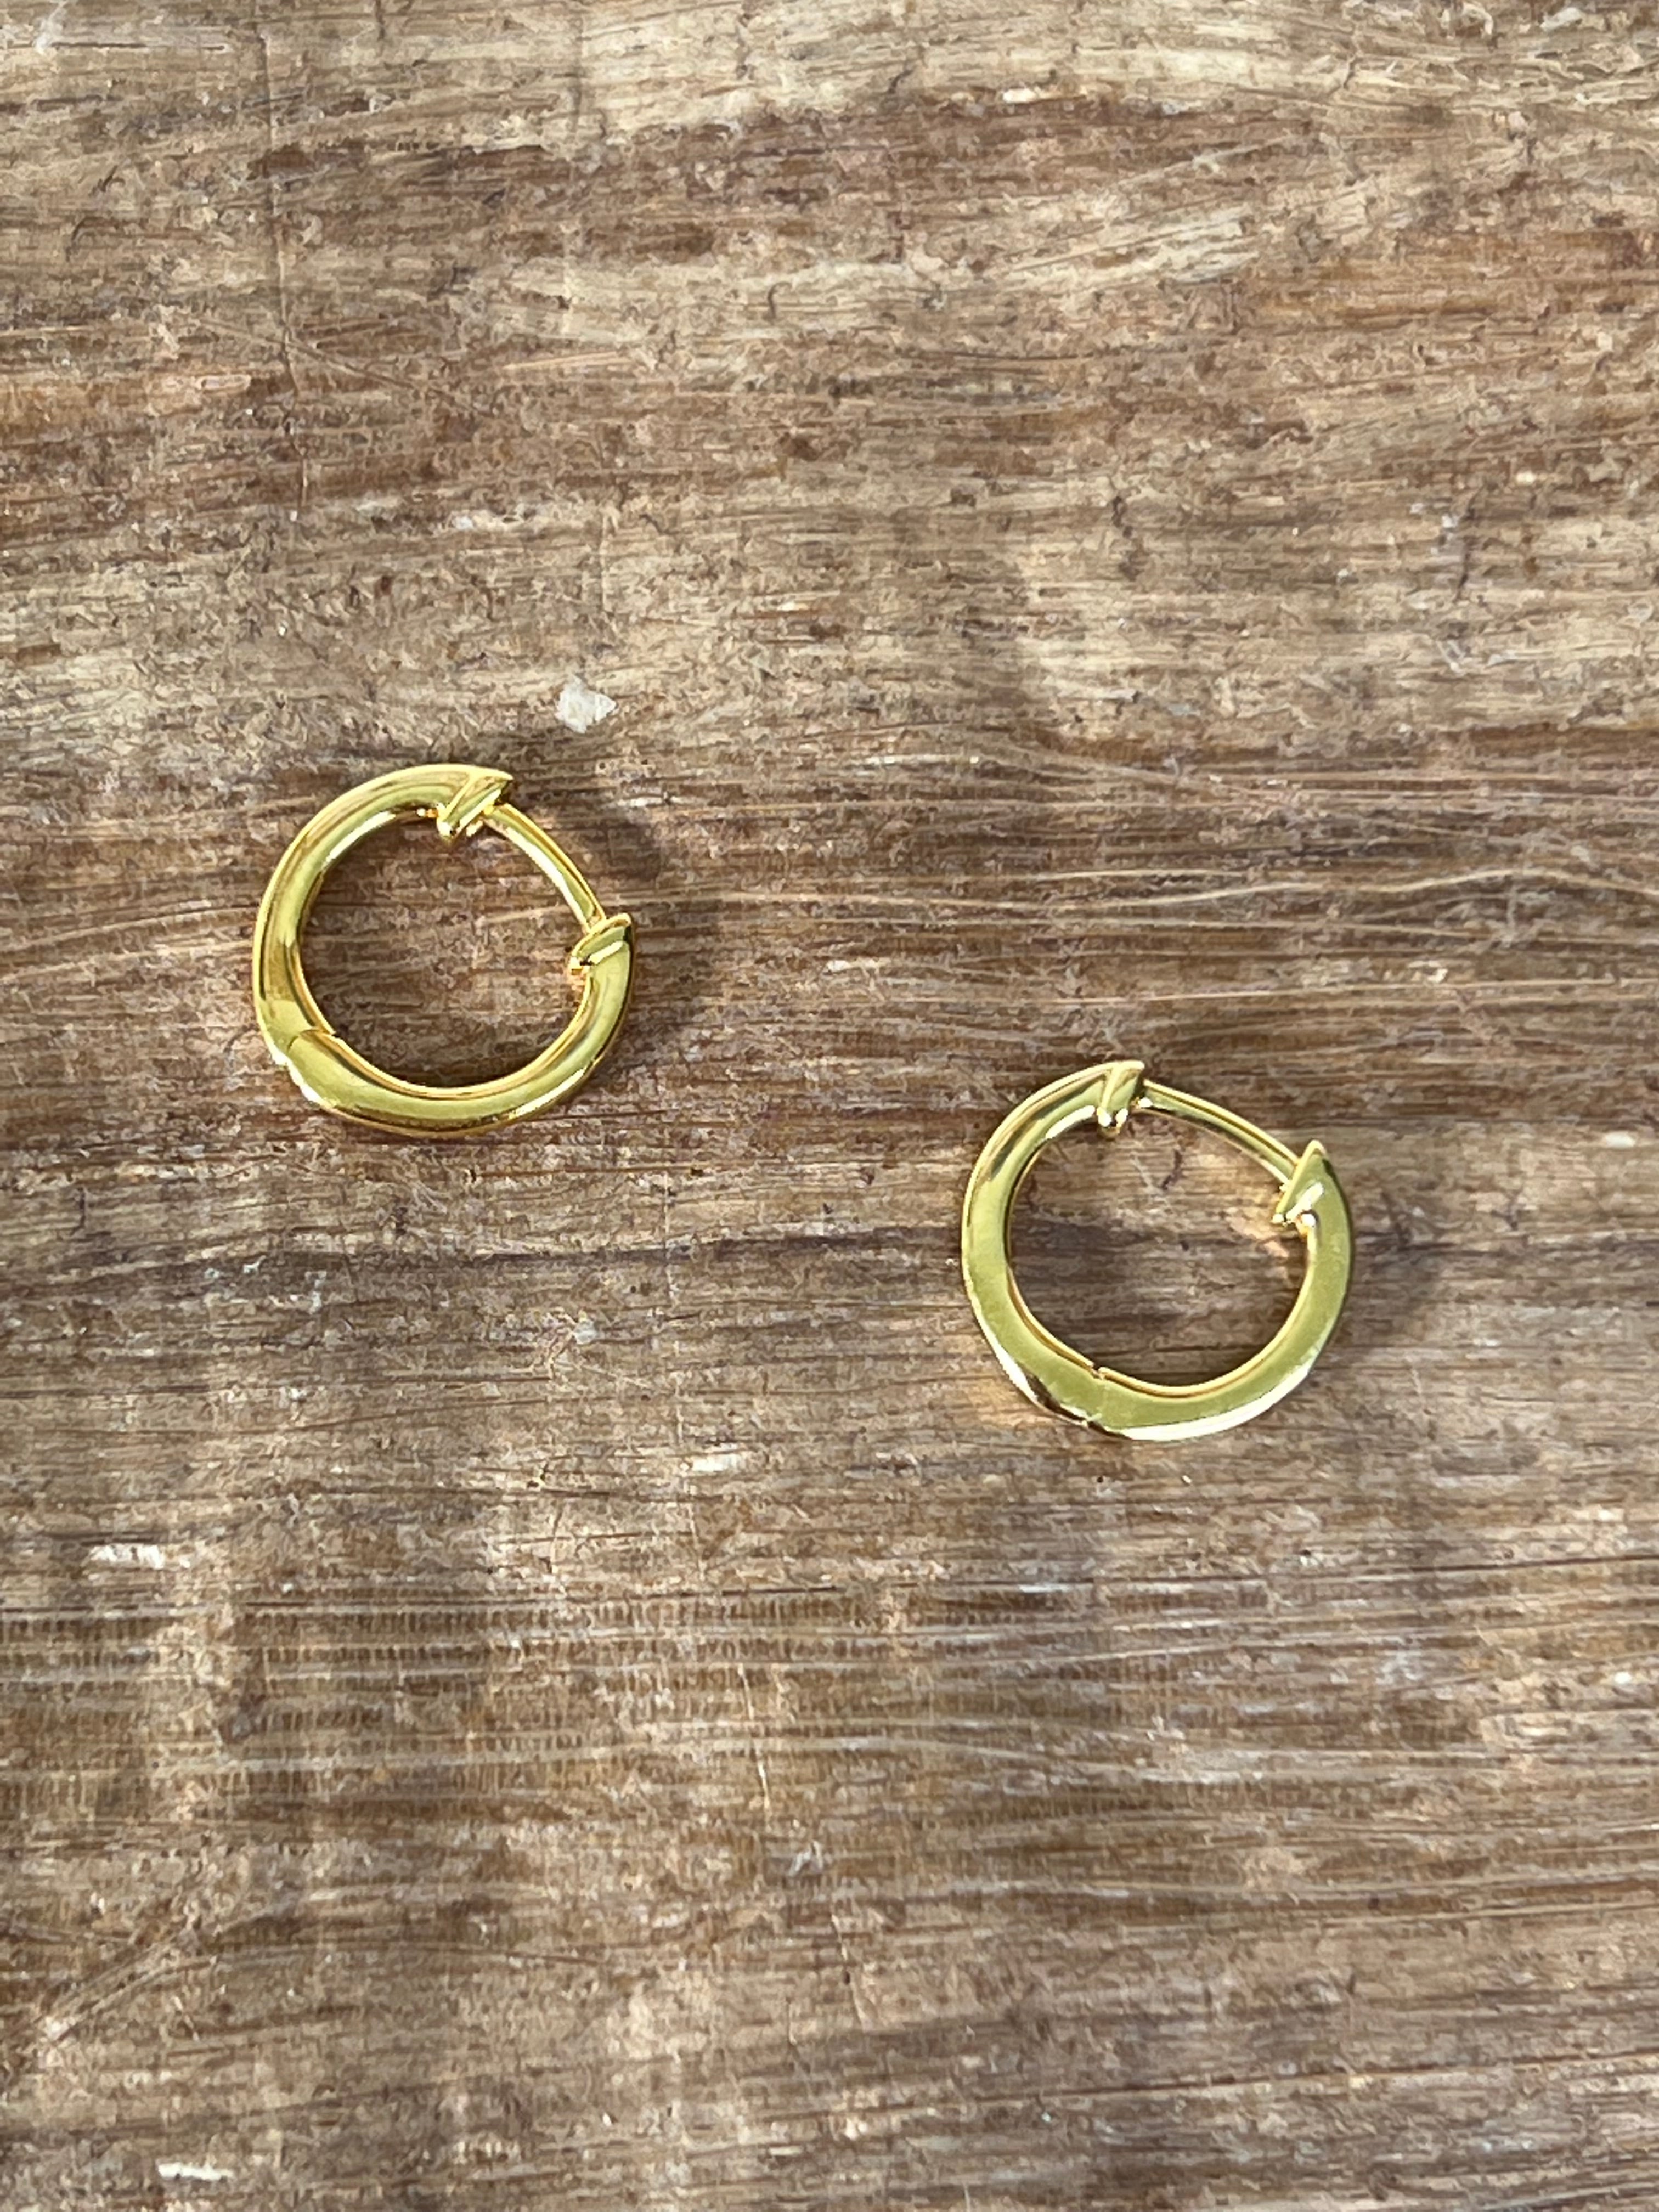 a detail image of two huggie hoop earrings in yellow gold laying on top of a wood grain backdrop.